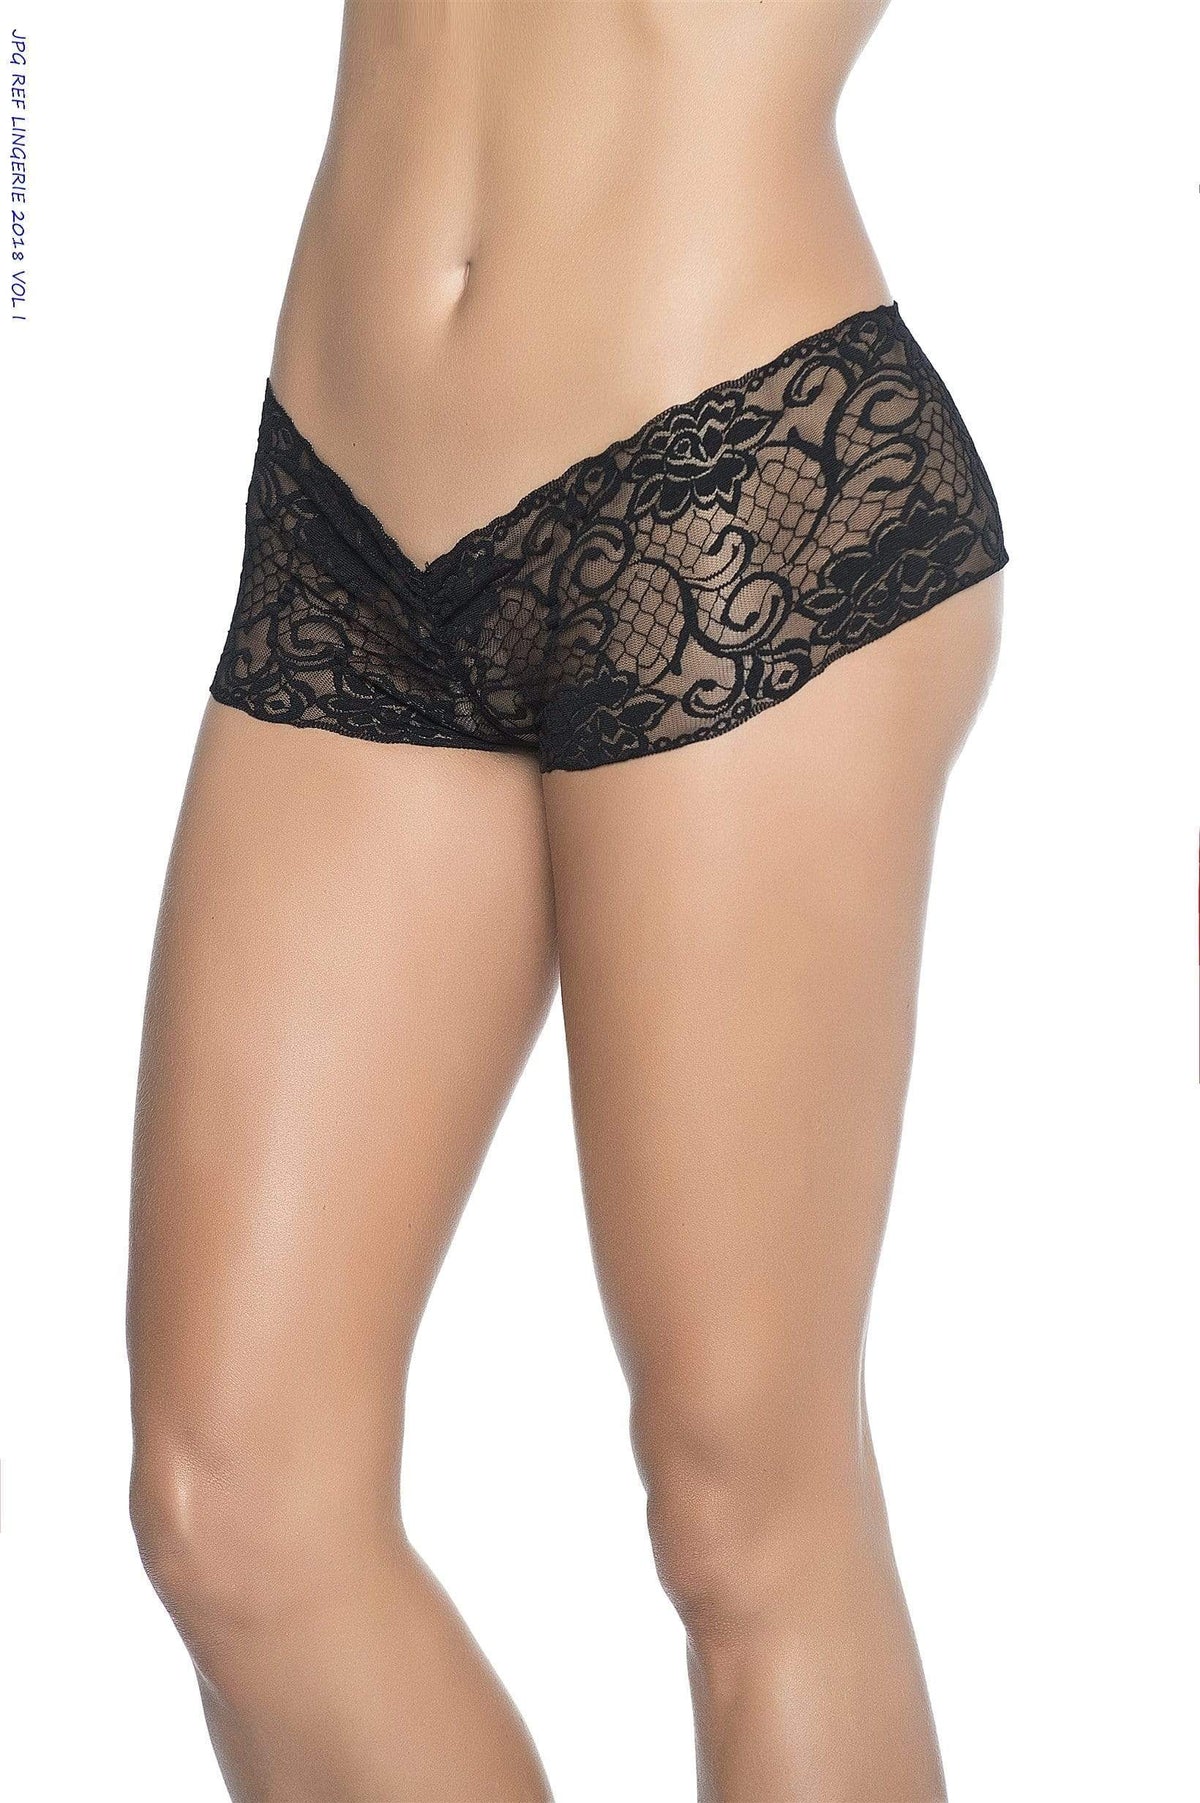 mapale Black / SMALL Turquoise Peek-a-Boo Crotchless Boyshort Panty Lingerie (Many Colors Available) SHS-98-BLACK-S-MA-3 Turquoise Peek-a-Boo Crotchless Boyshort Panty Lingerie (Many Colors Available) Apparel &amp; Accessories &gt; Clothing &gt; Underwear &amp; Socks &gt; Underwear